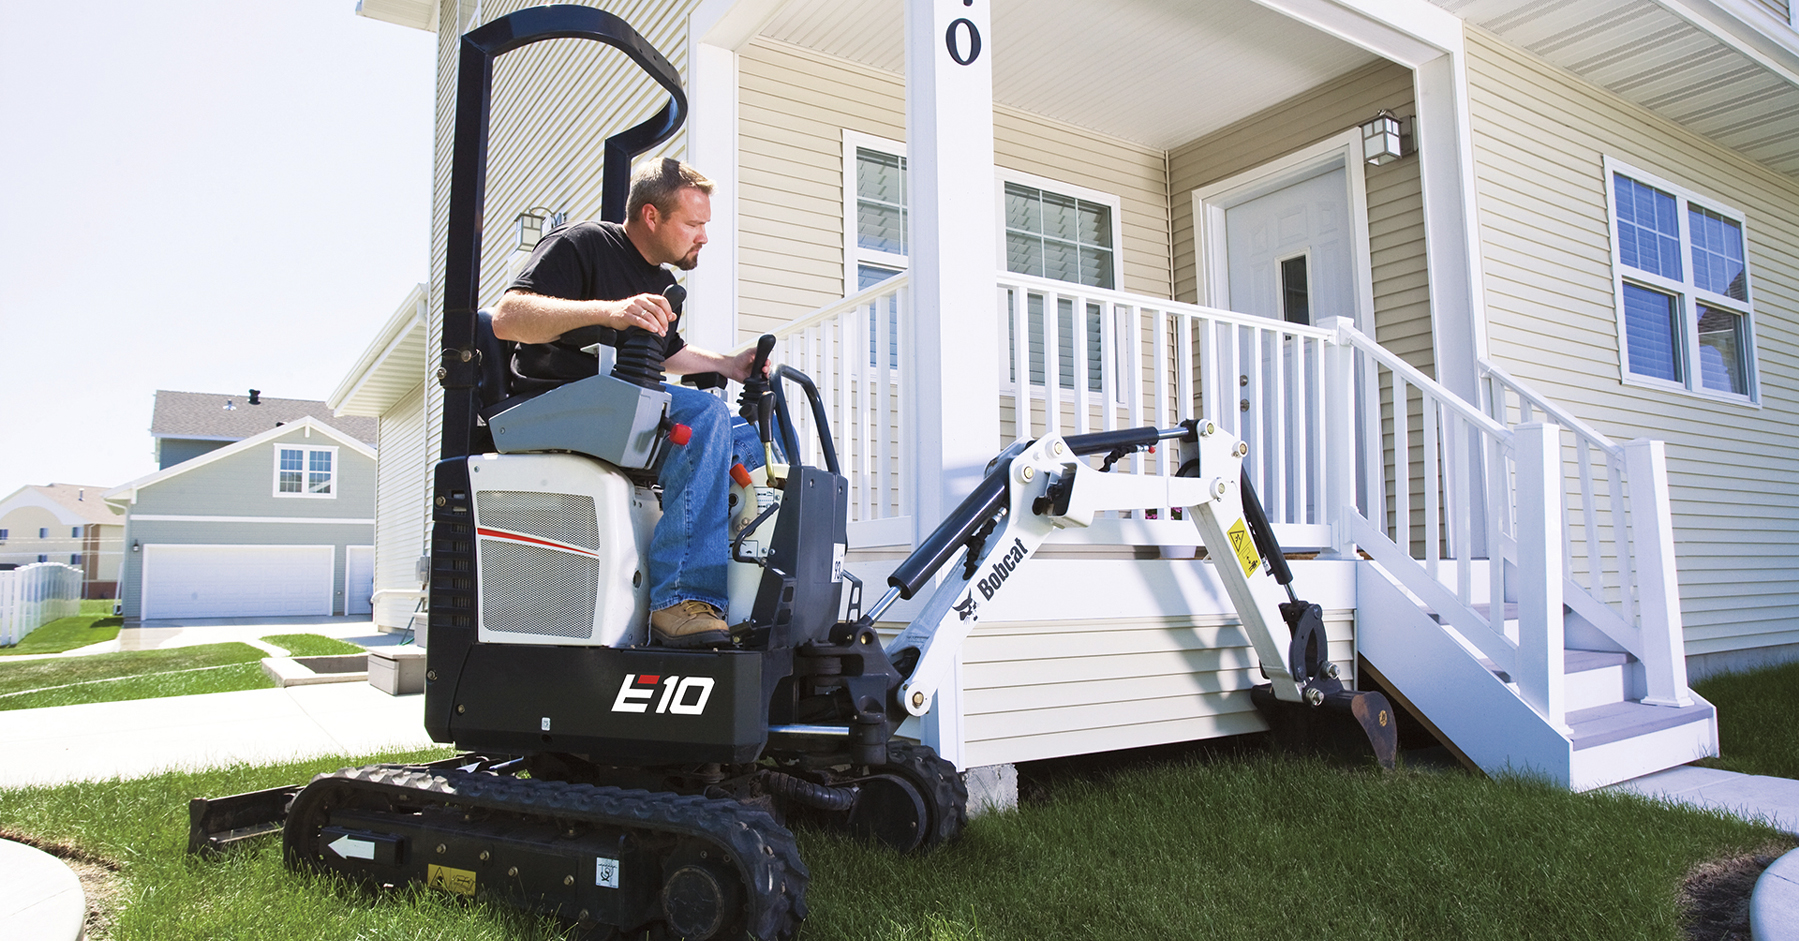 A Step-By-Step Guide To Mini-Excavators